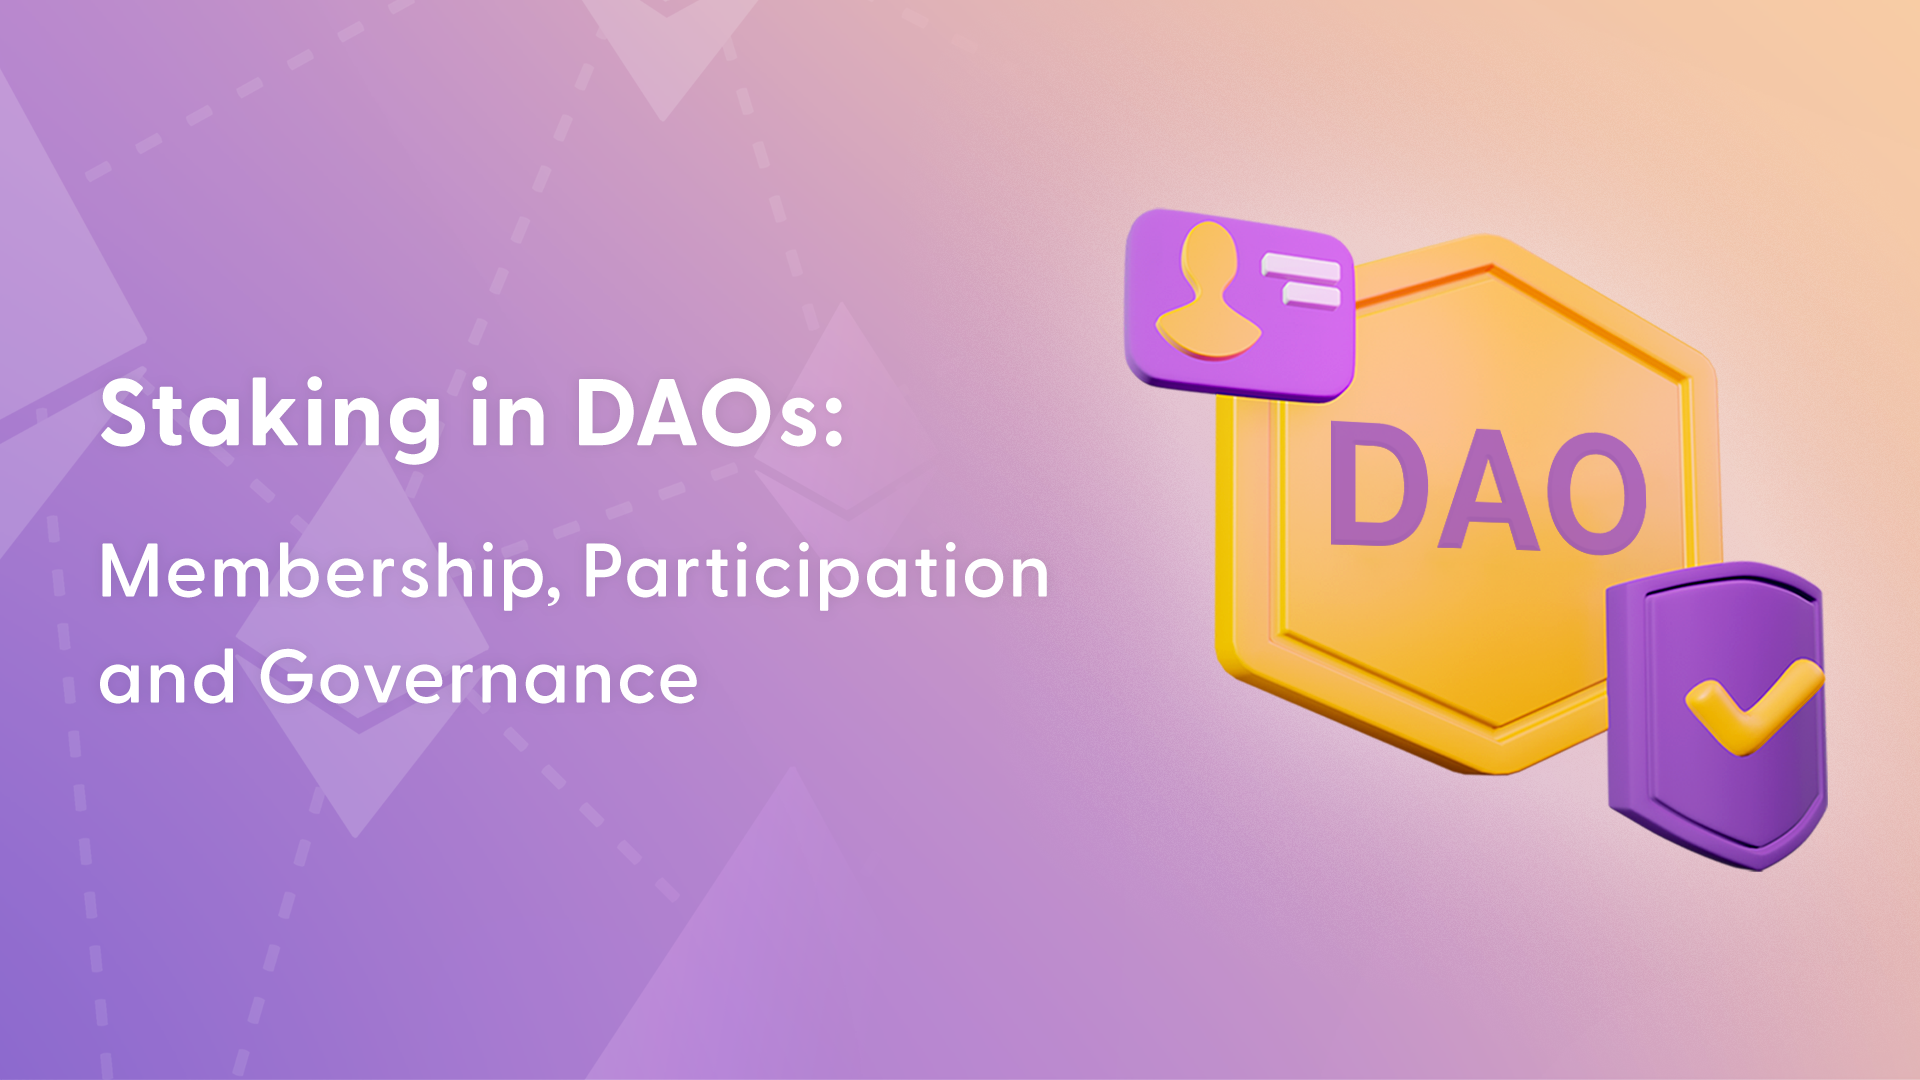 Staking in DAOs